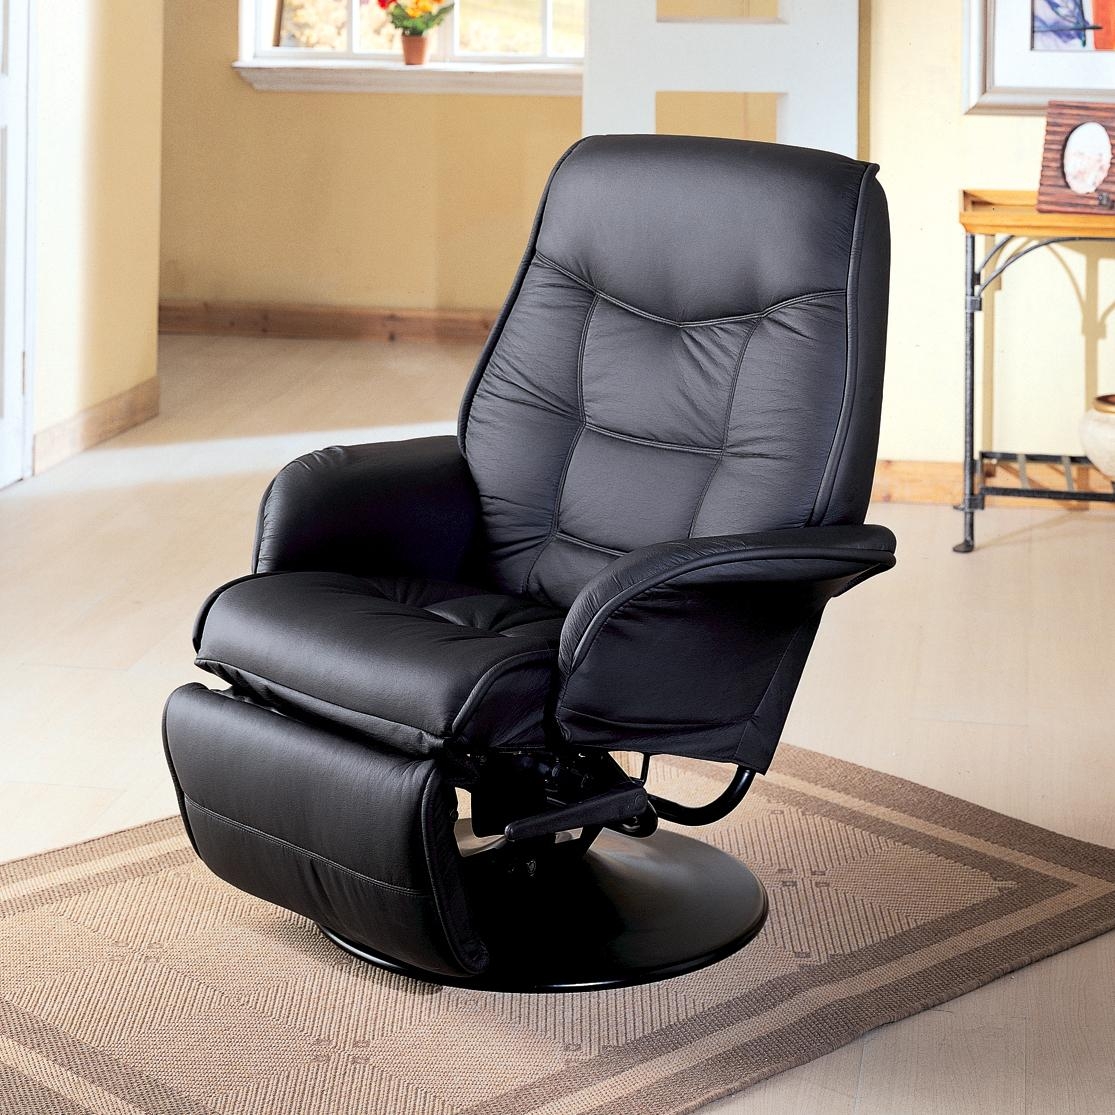 Most Comfortable Recliners Visualhunt, Leather Swivel Rocker Recliners